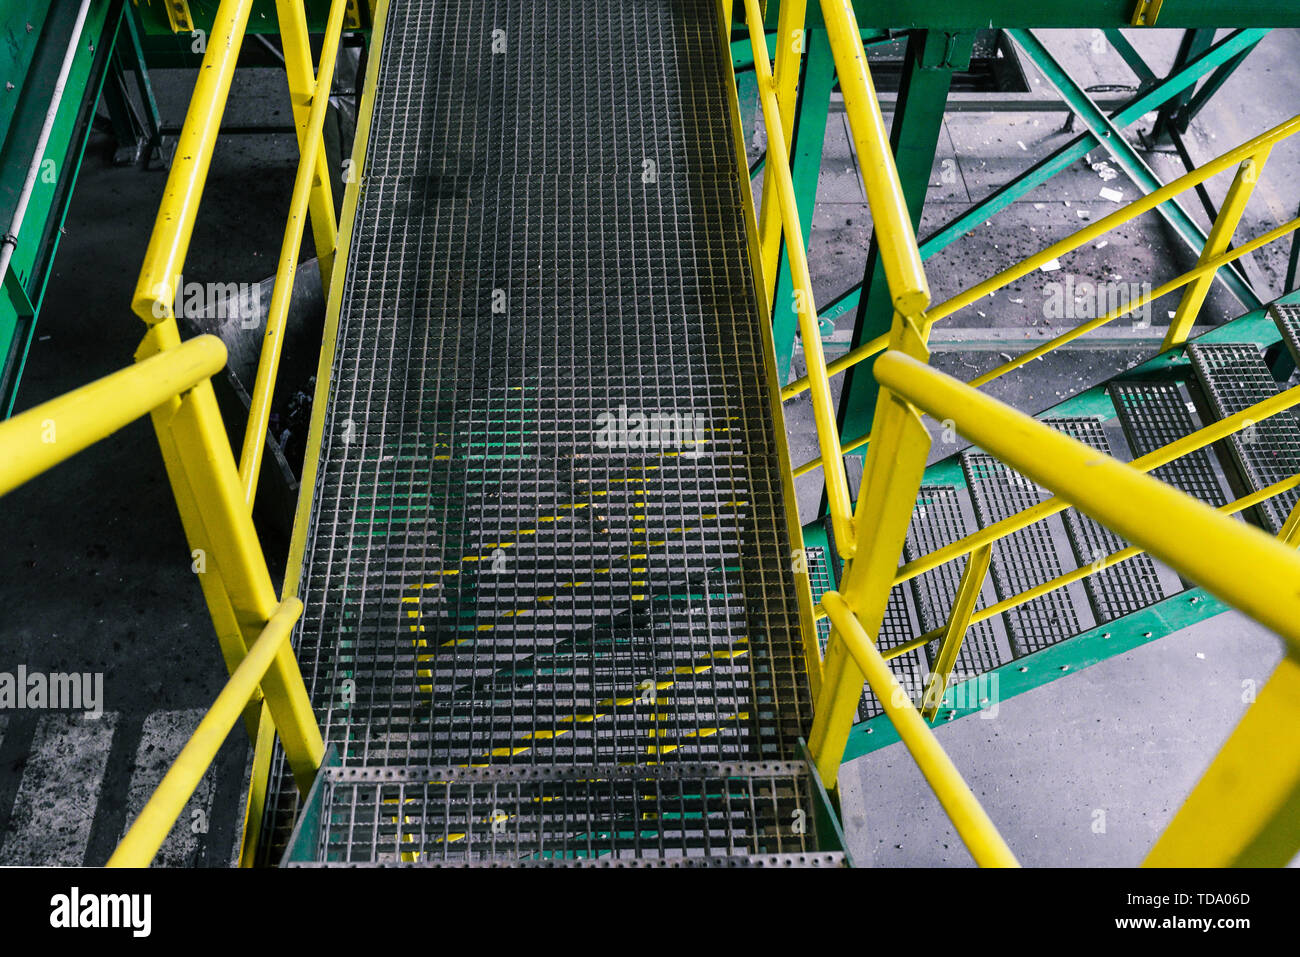 The metal ladder painted in green and yellow colors. Iron ladder in an industrial plant or factory. Metal grating on the floor Stock Photo